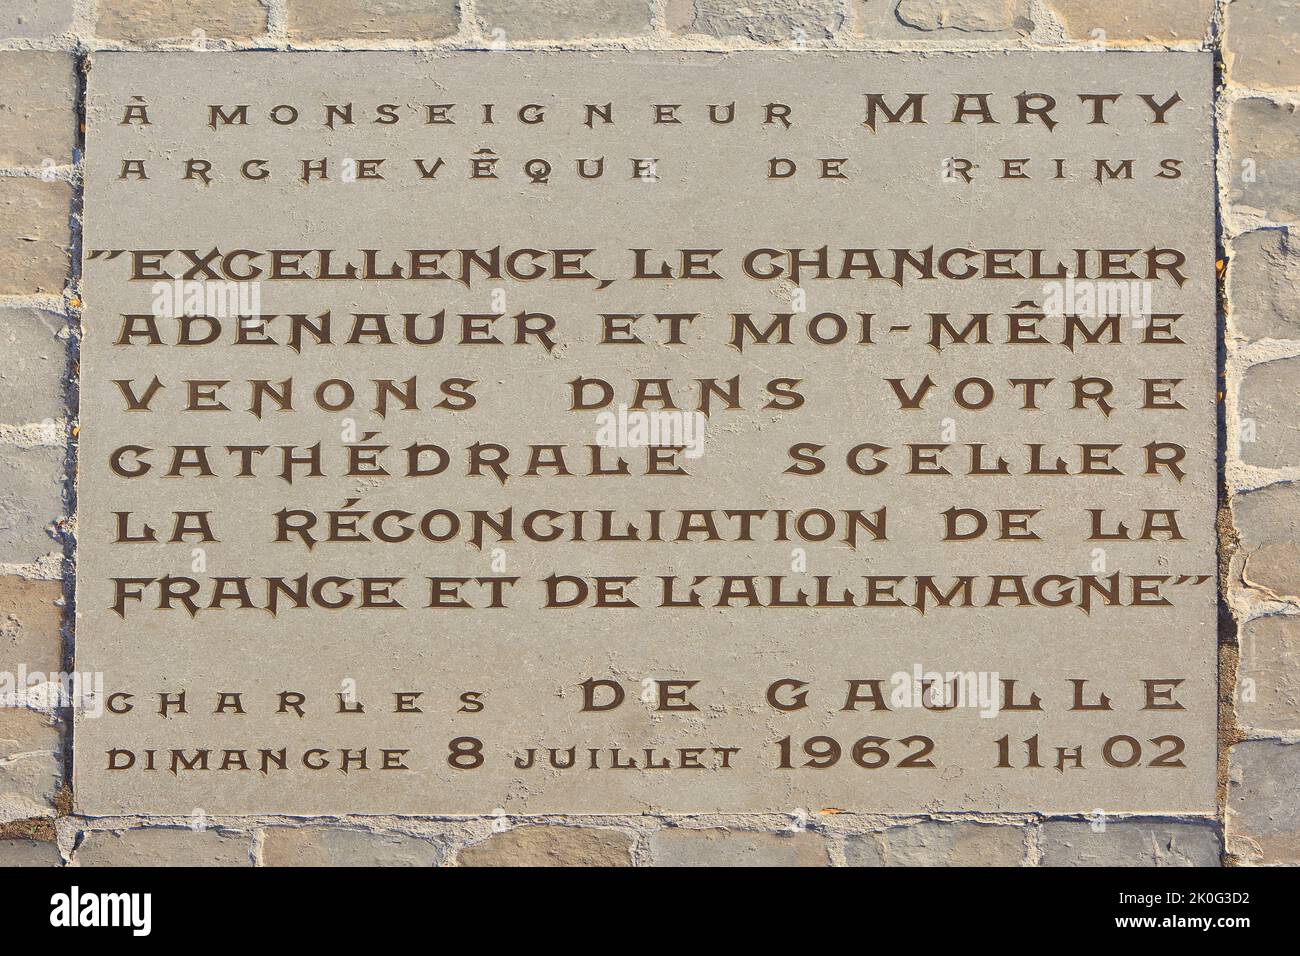 Commemorative plaque for the Franco-German reconciliation on the 8th of July 1962 at the entrance of Reims Cathedral in Reims (Marne), France Stock Photo